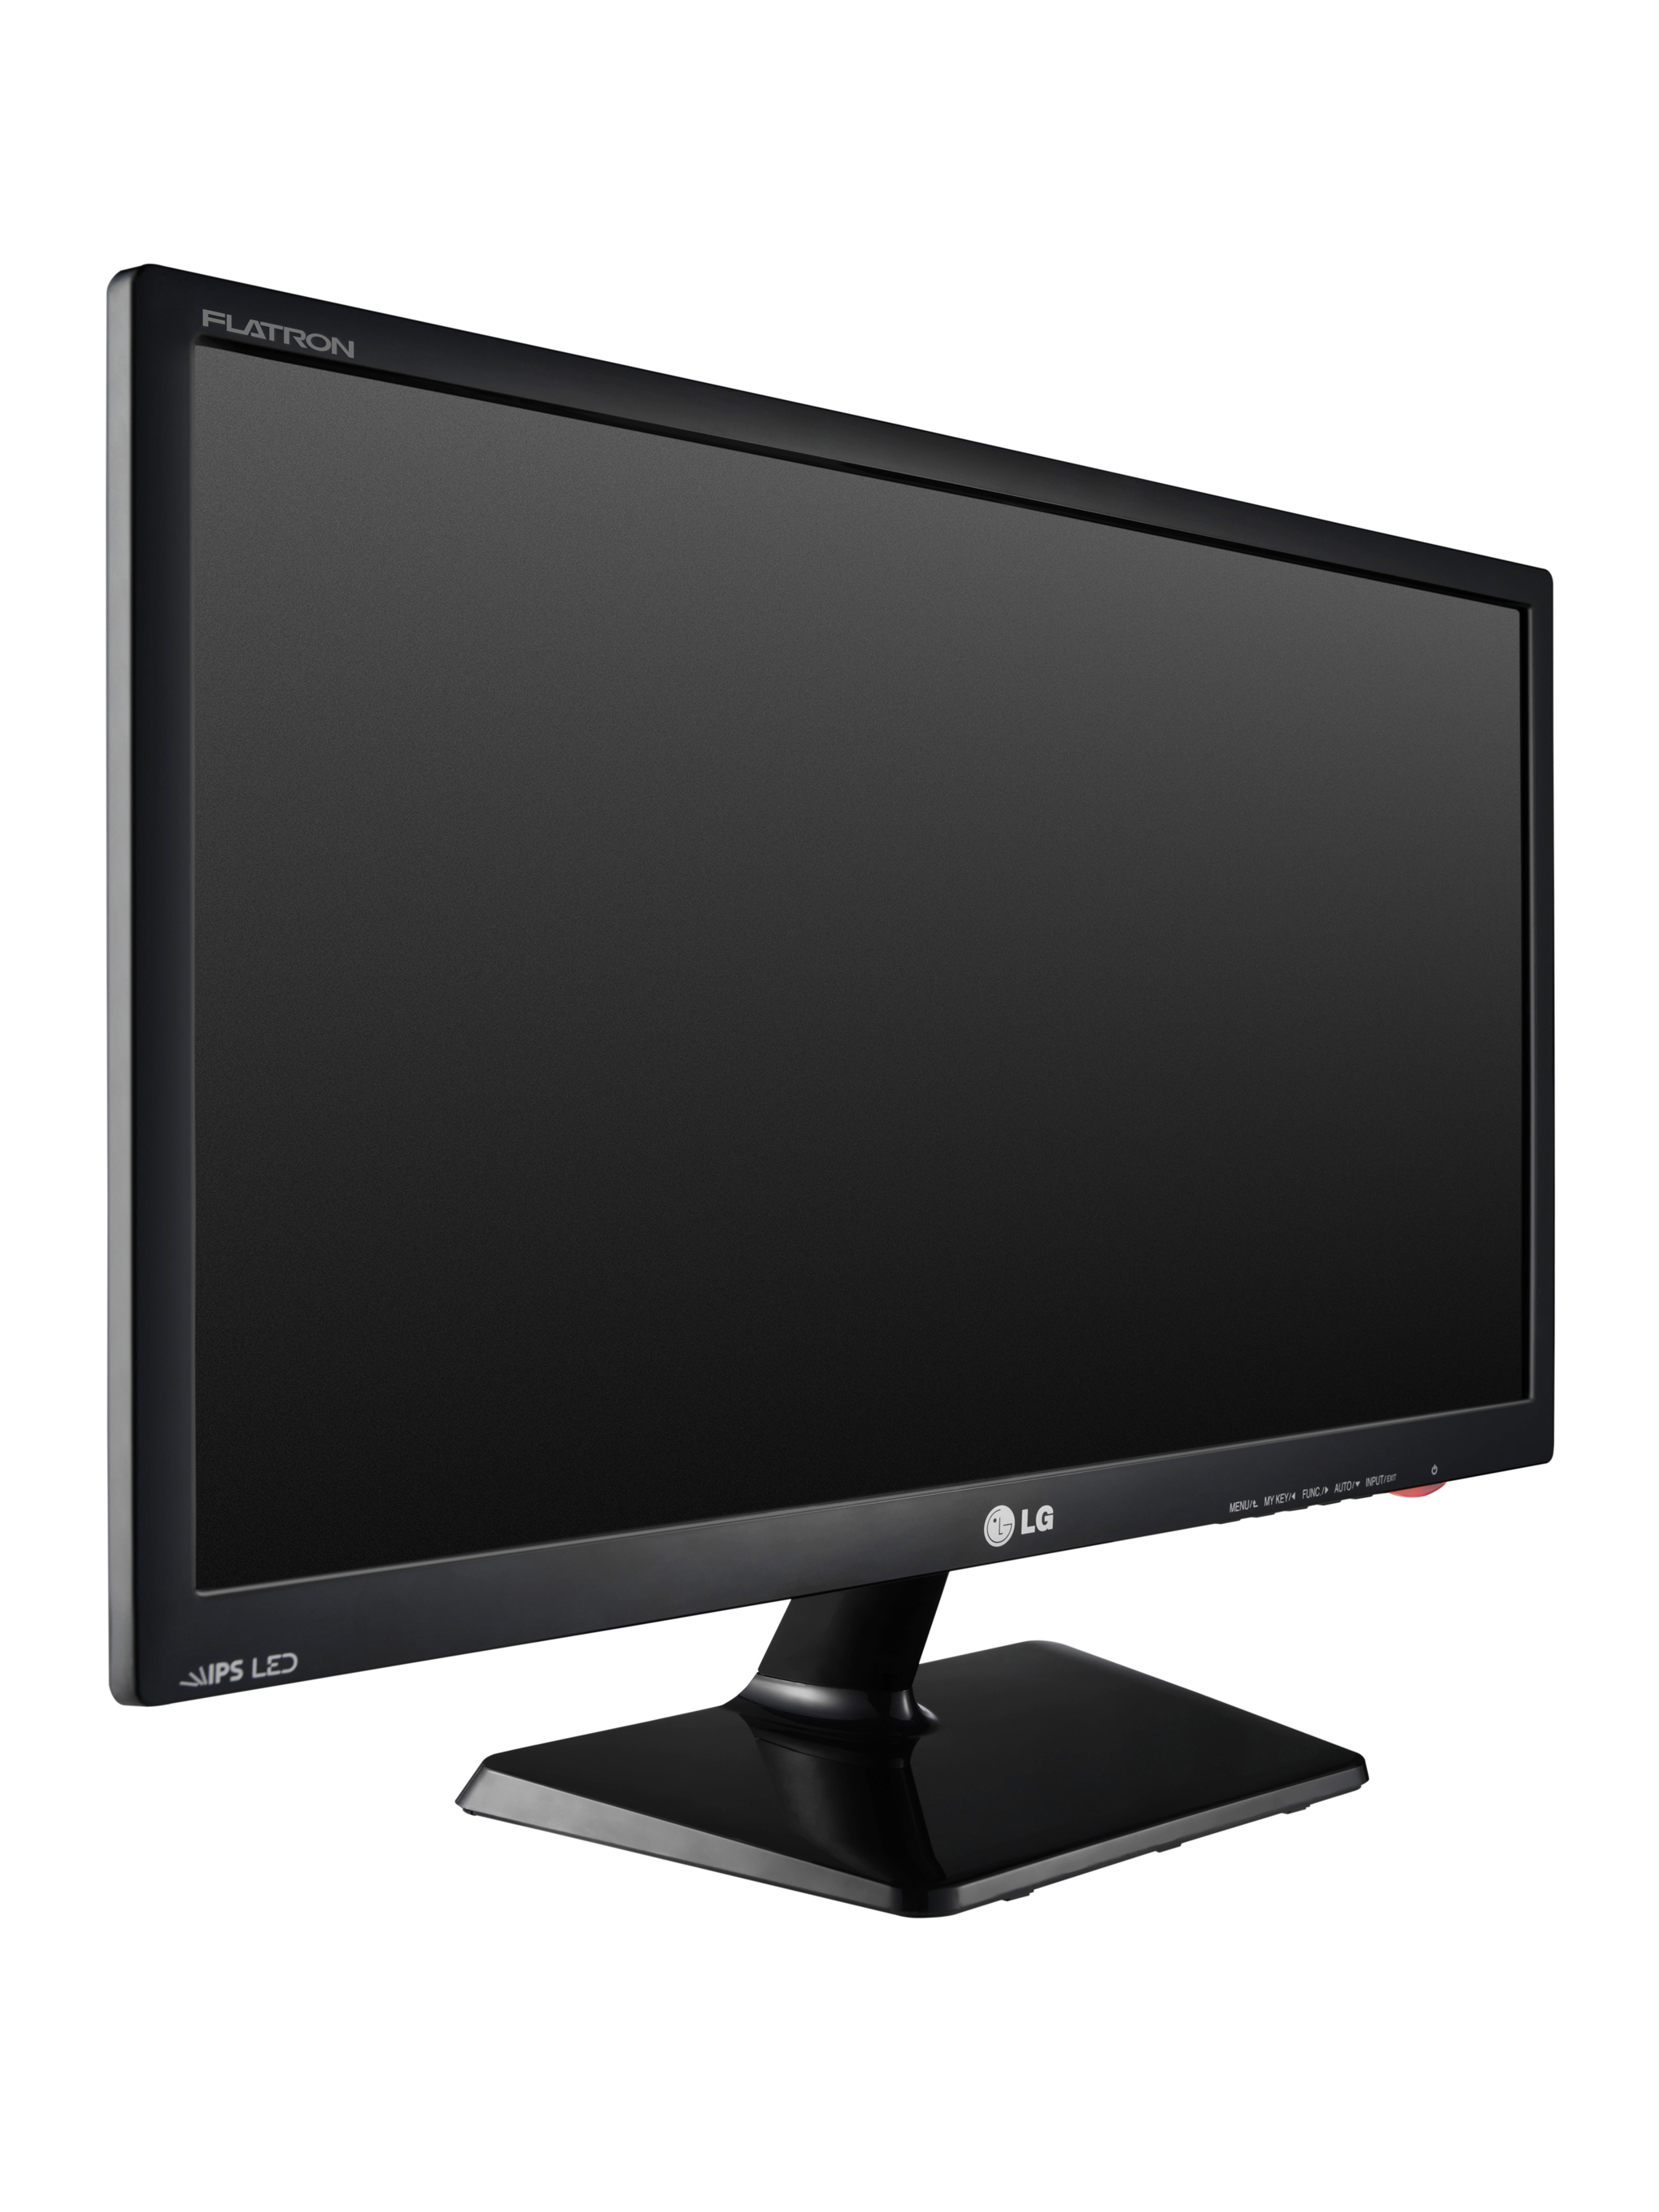 A left-side view of LG’s new IPS monitor the IPS4